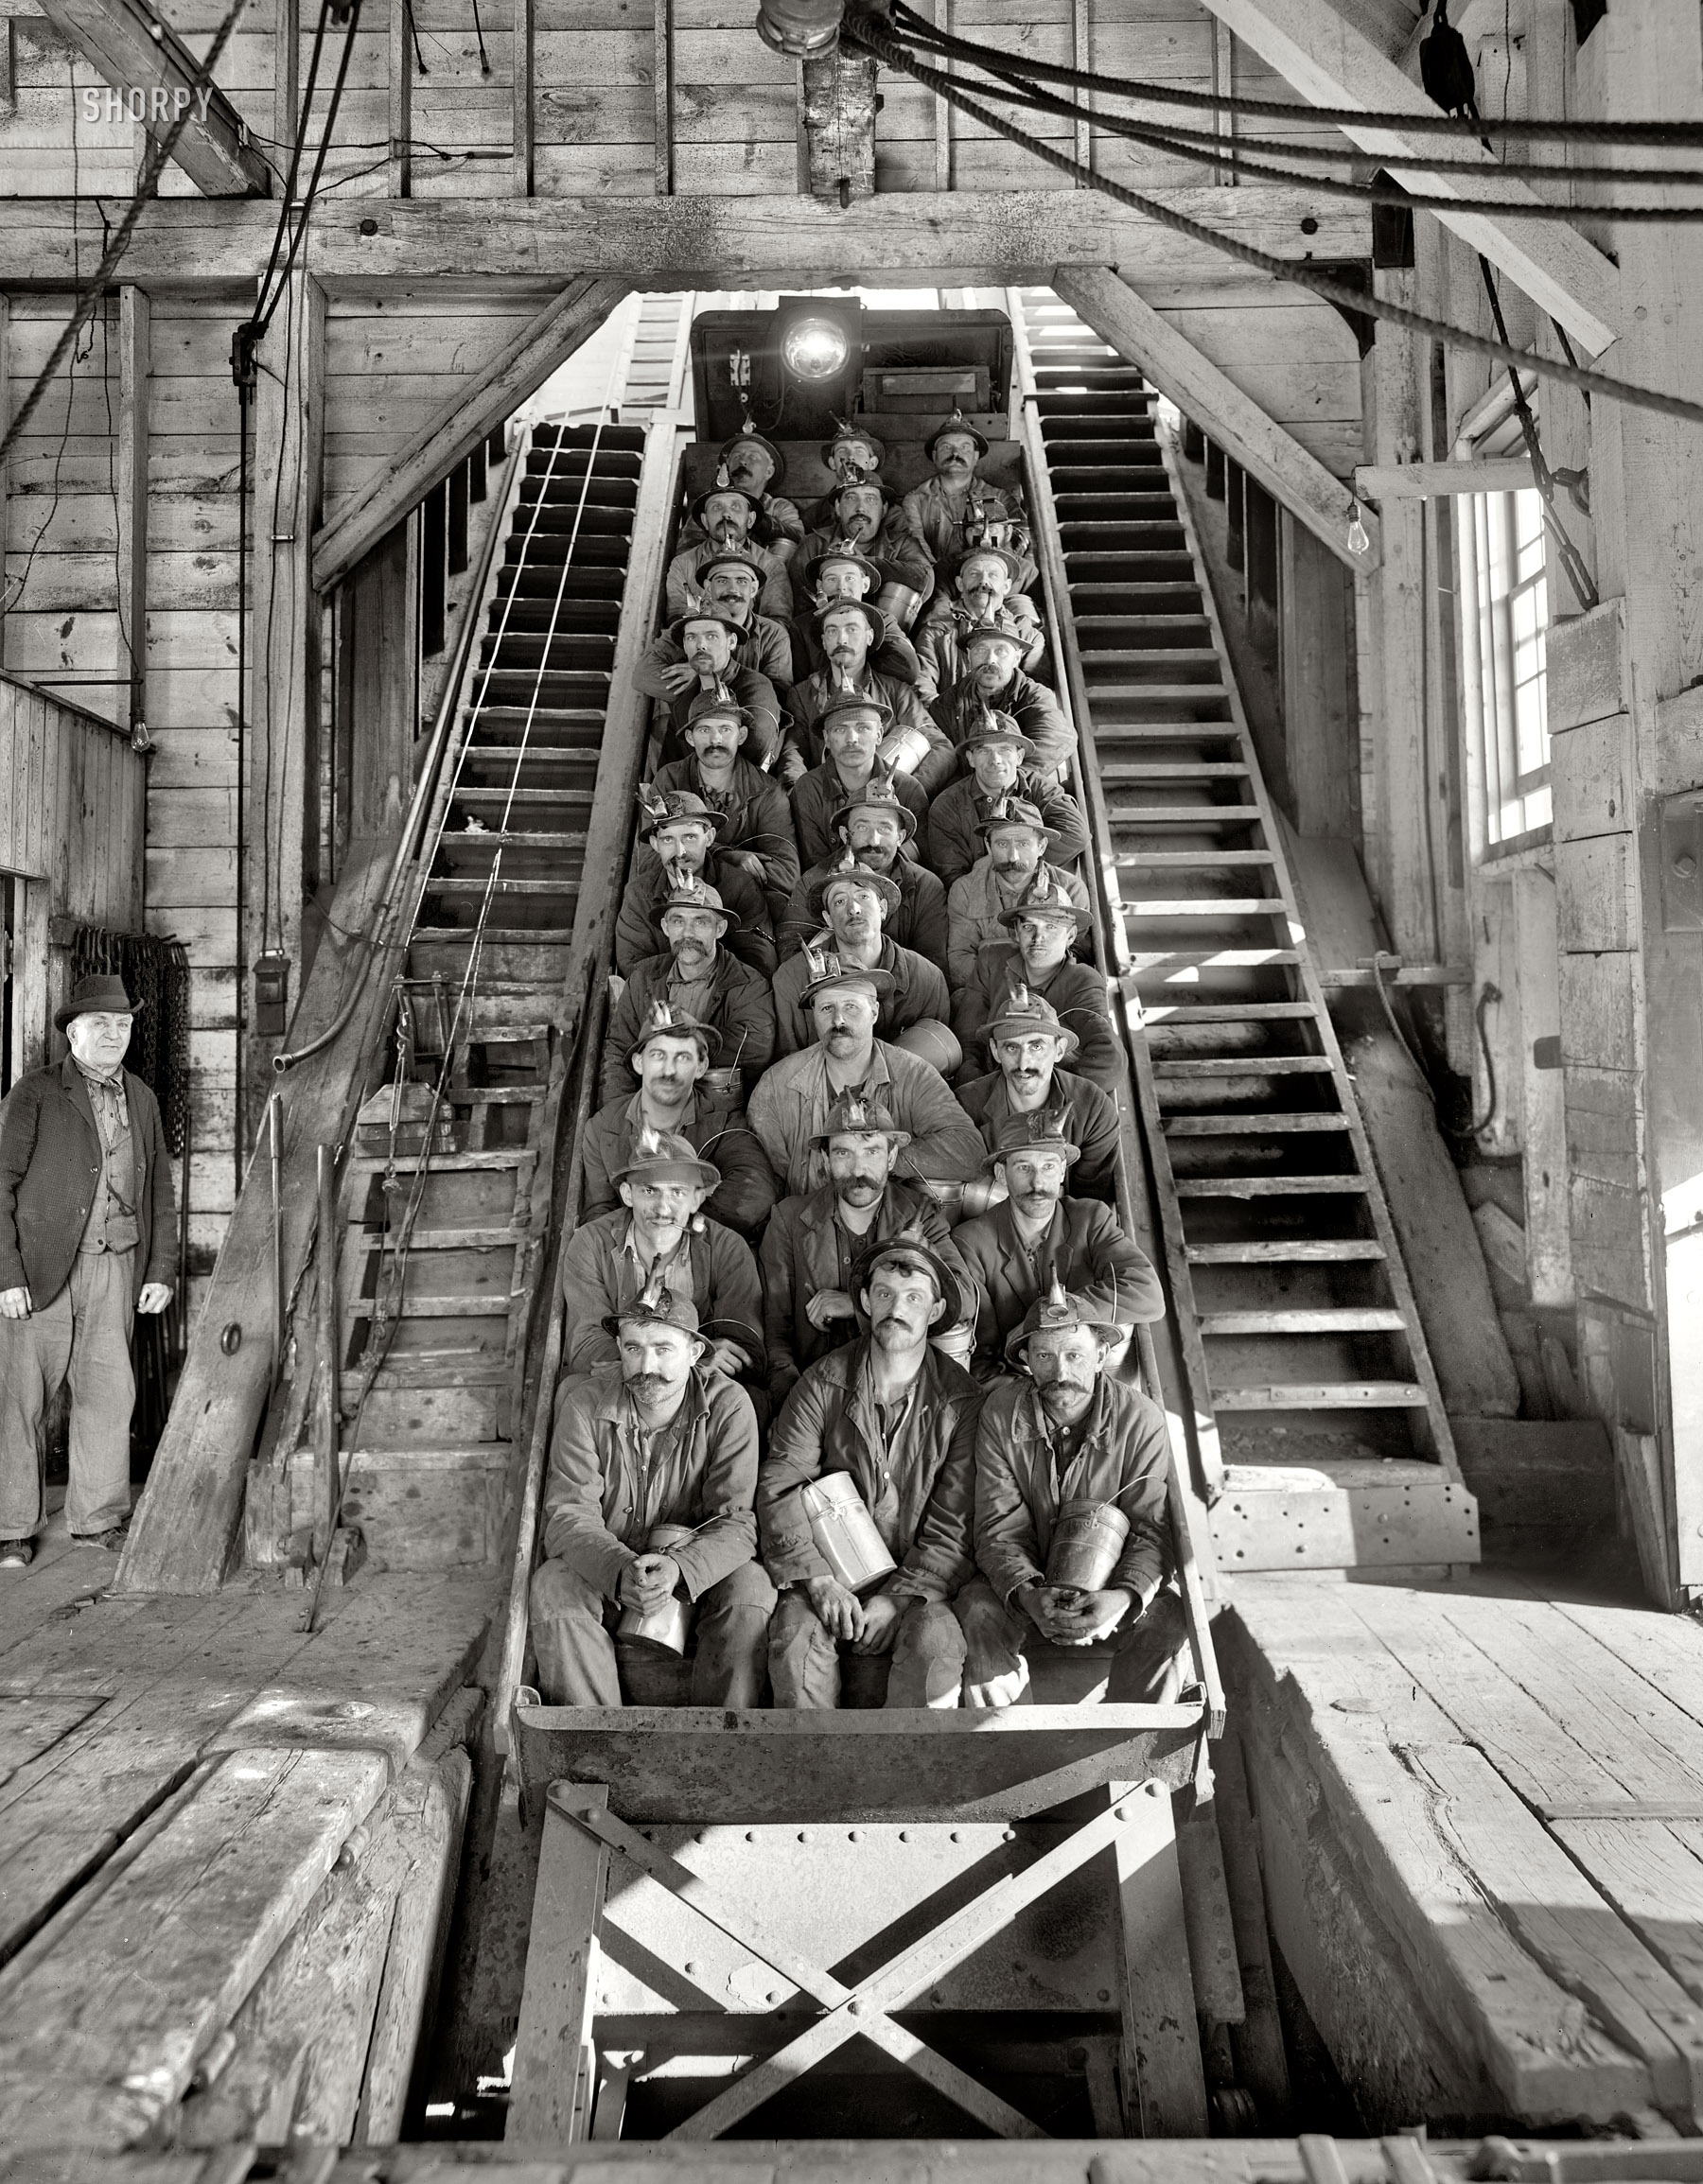 Calumet, Michigan, circa 1905. "Just up, Hecla Shaft No. 2." Copper miners topside. 8x10 inch dry glass negative, Detroit Publishing Co. View full size.